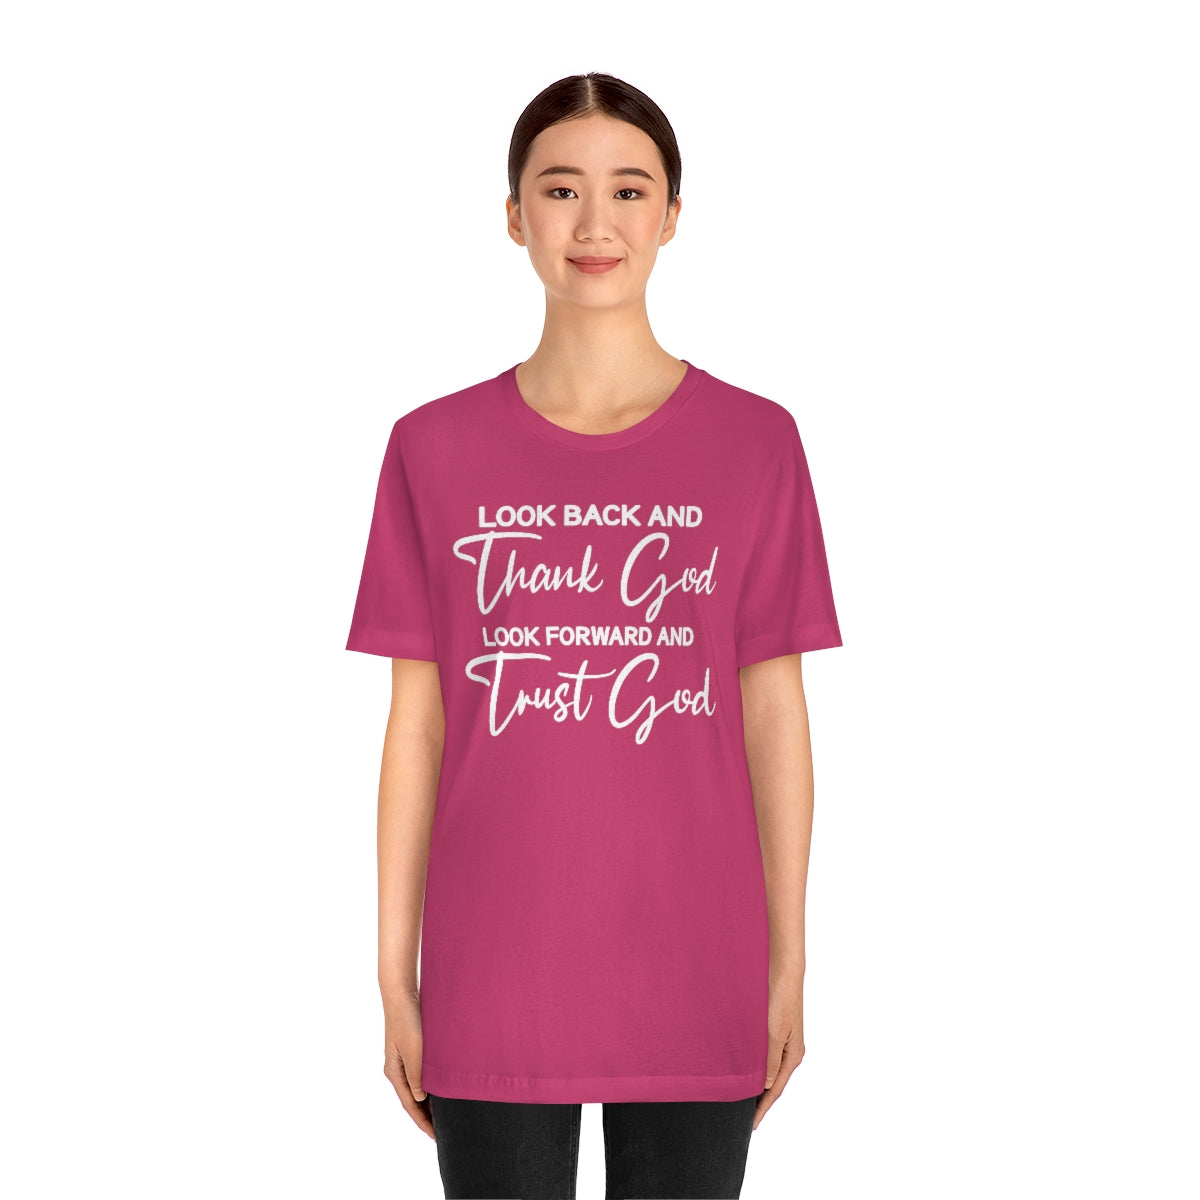 Look Back and Thank God Tee